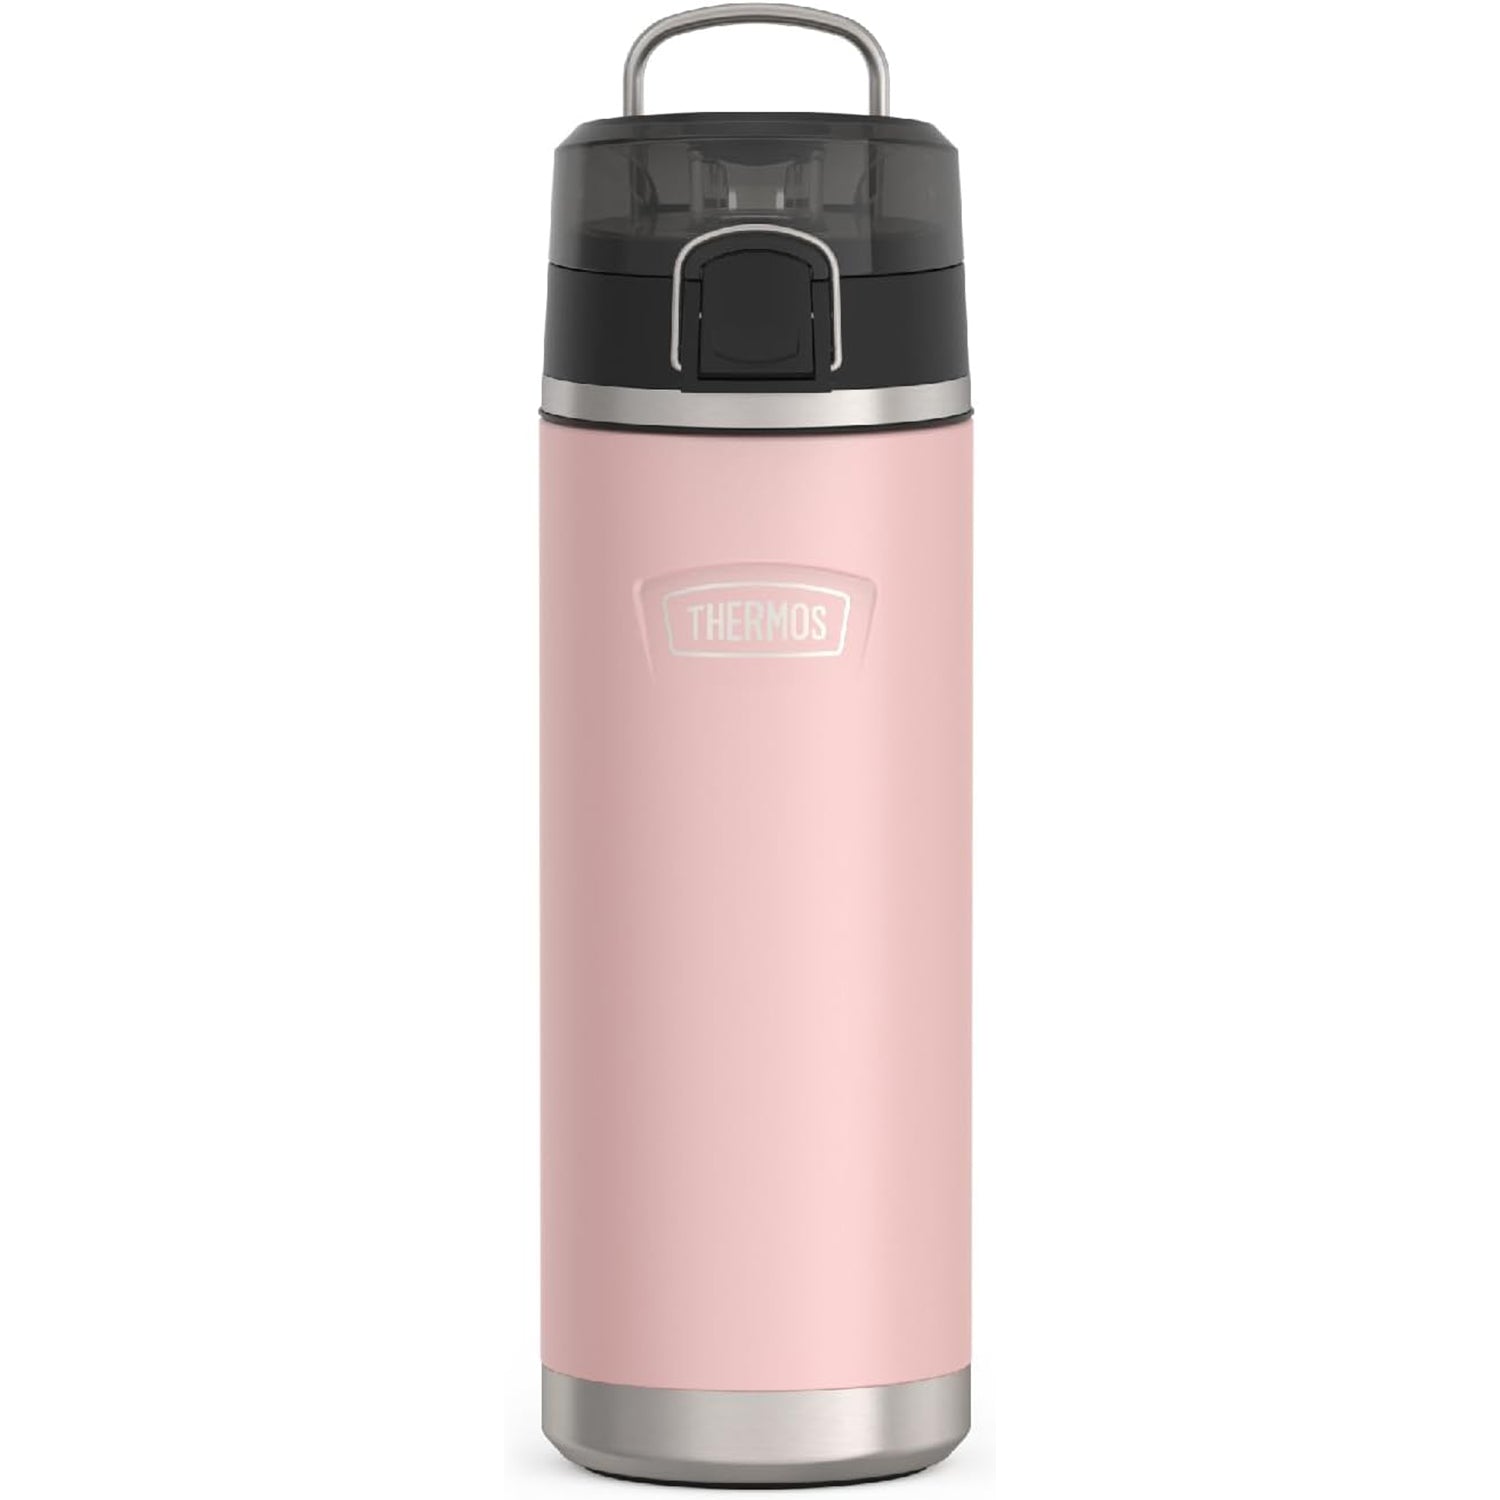  THERMOS FUNTAINER 16 Ounce Stainless Steel Vacuum Insulated  Bottle with Wide Spout Lid, Galaxy Teal: Home & Kitchen